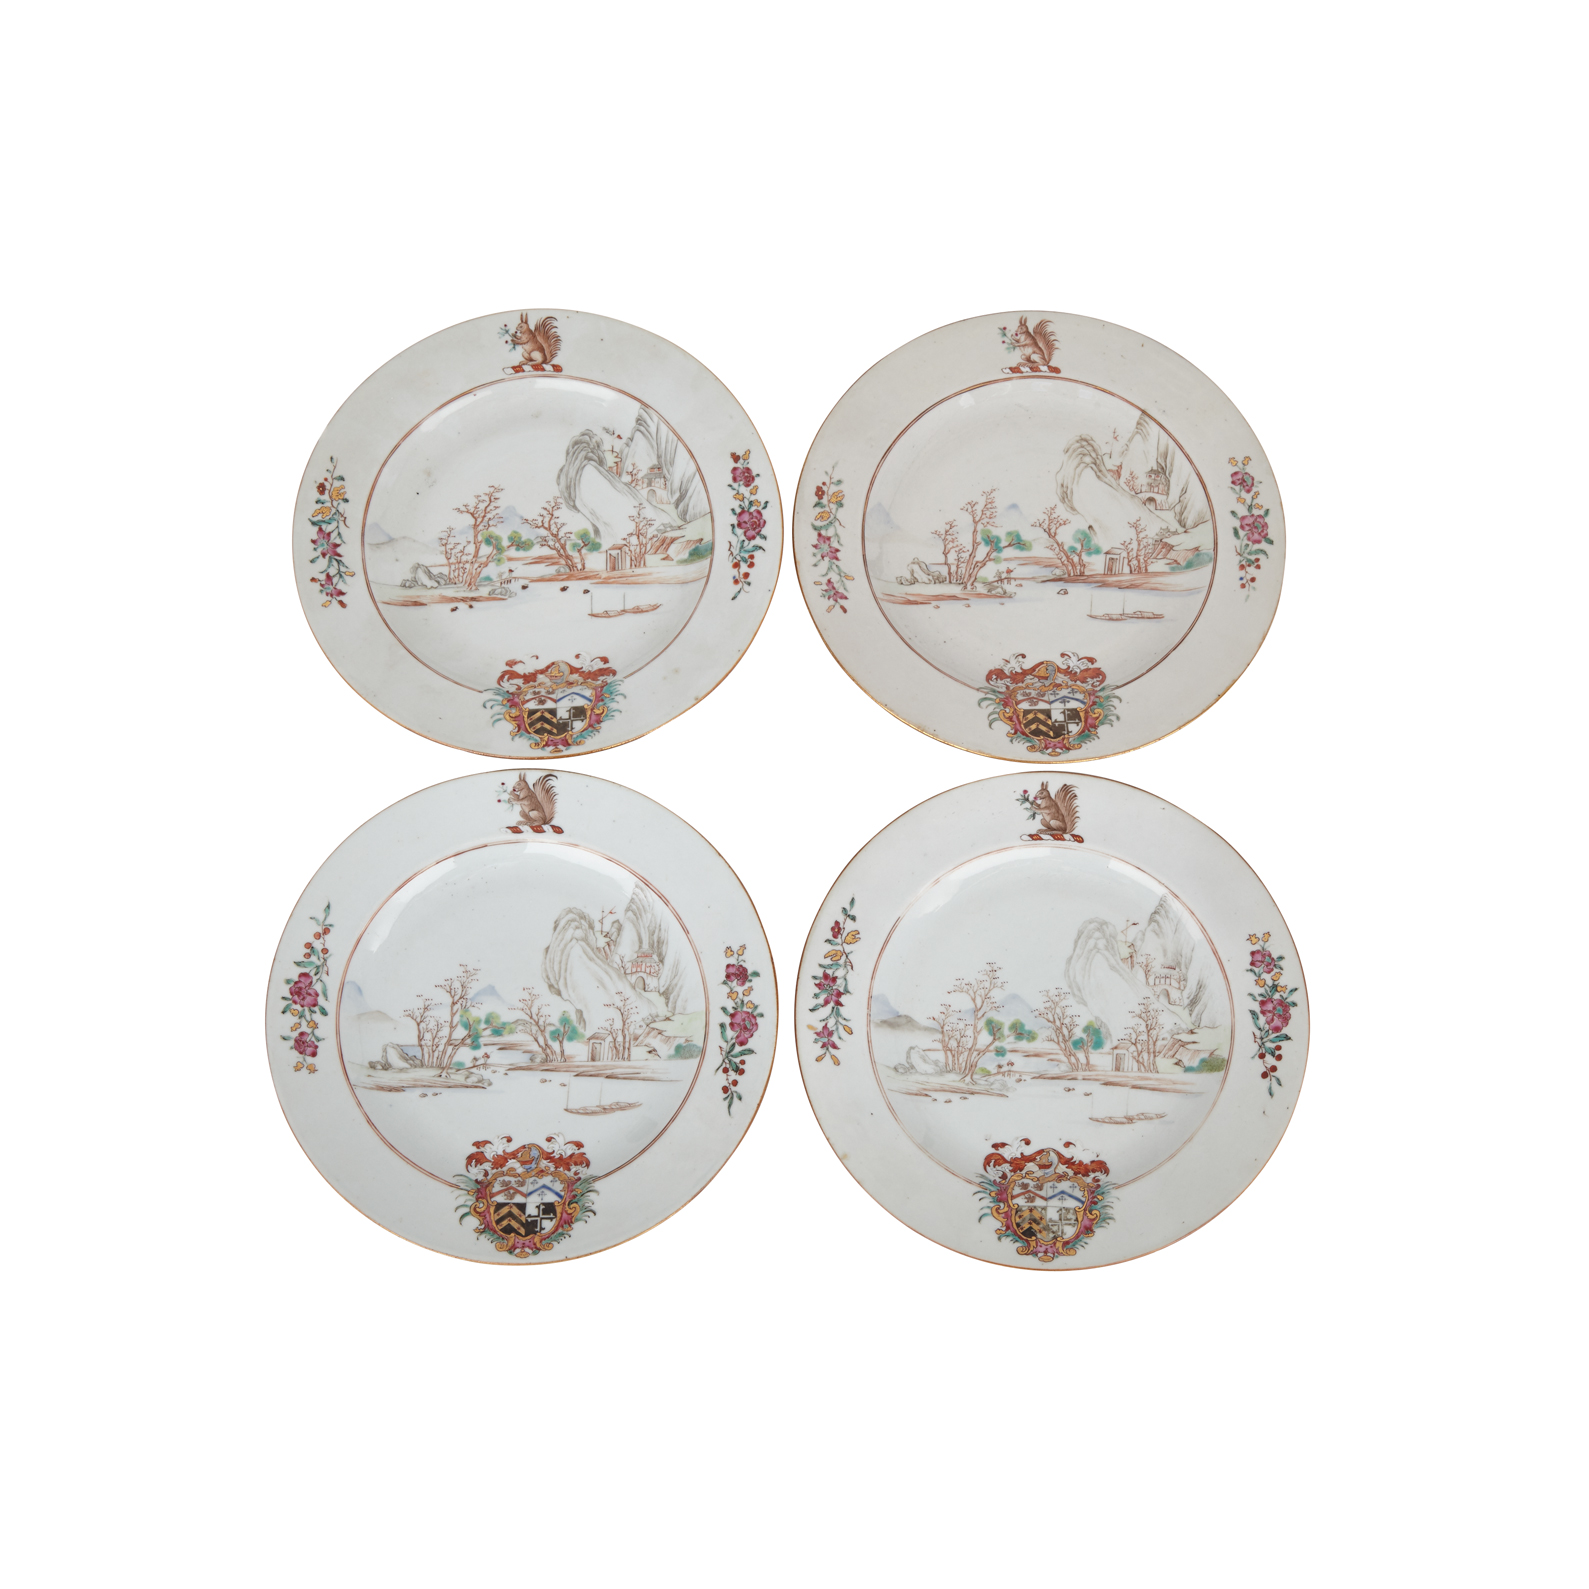 Set of Four Export Armorial Plates, 18th Century